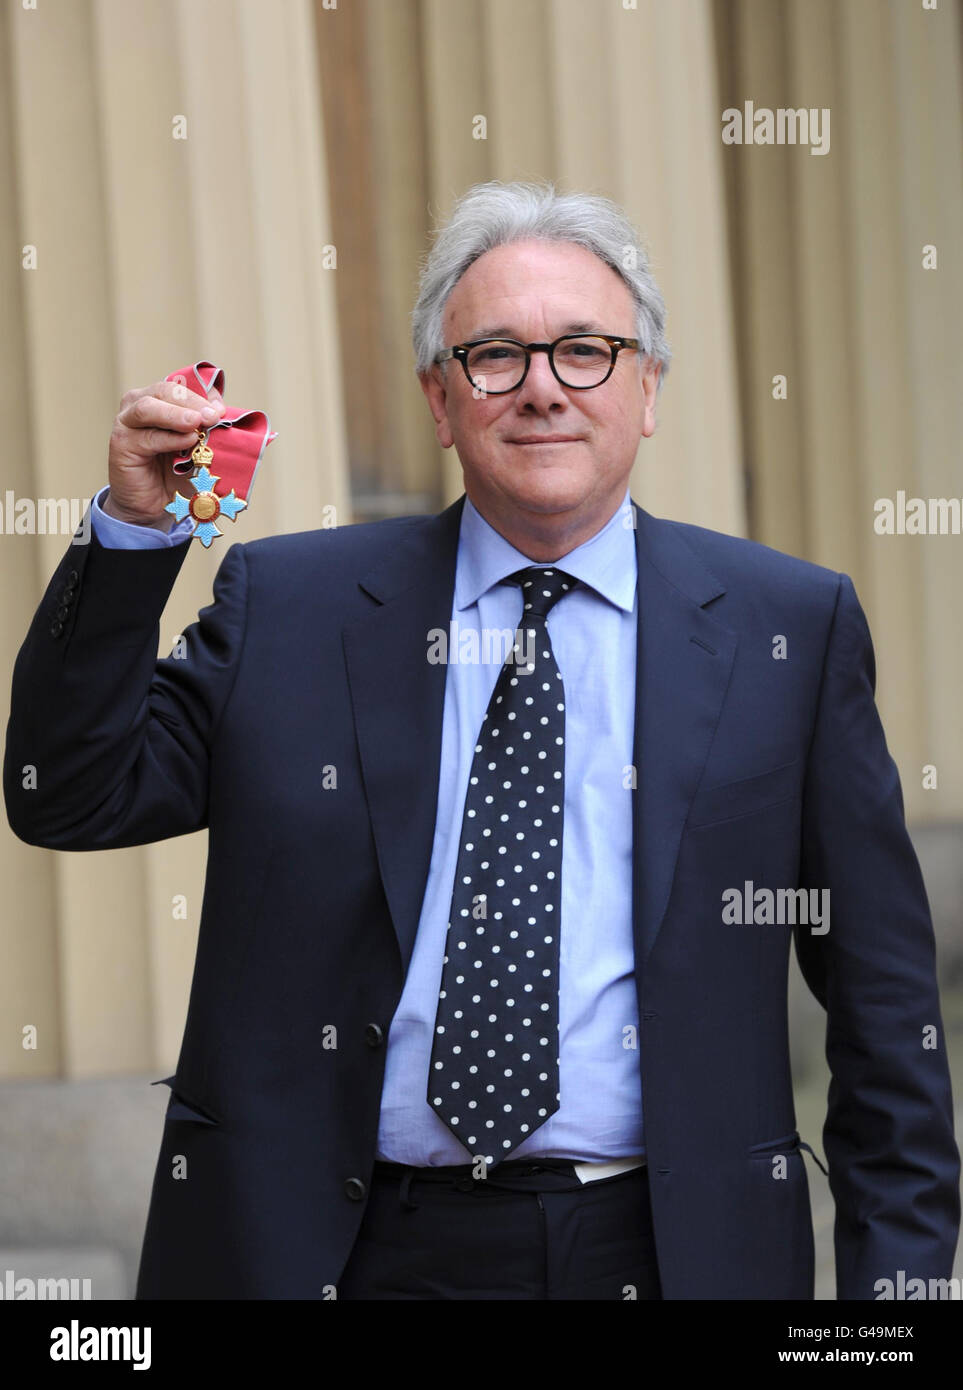 Record producer Trevor Horn poses in the Quadrangle of Buckingham Palace, London after being presented with a Commander of the British Empire (CBE) by the Prince of Wales. Stock Photo